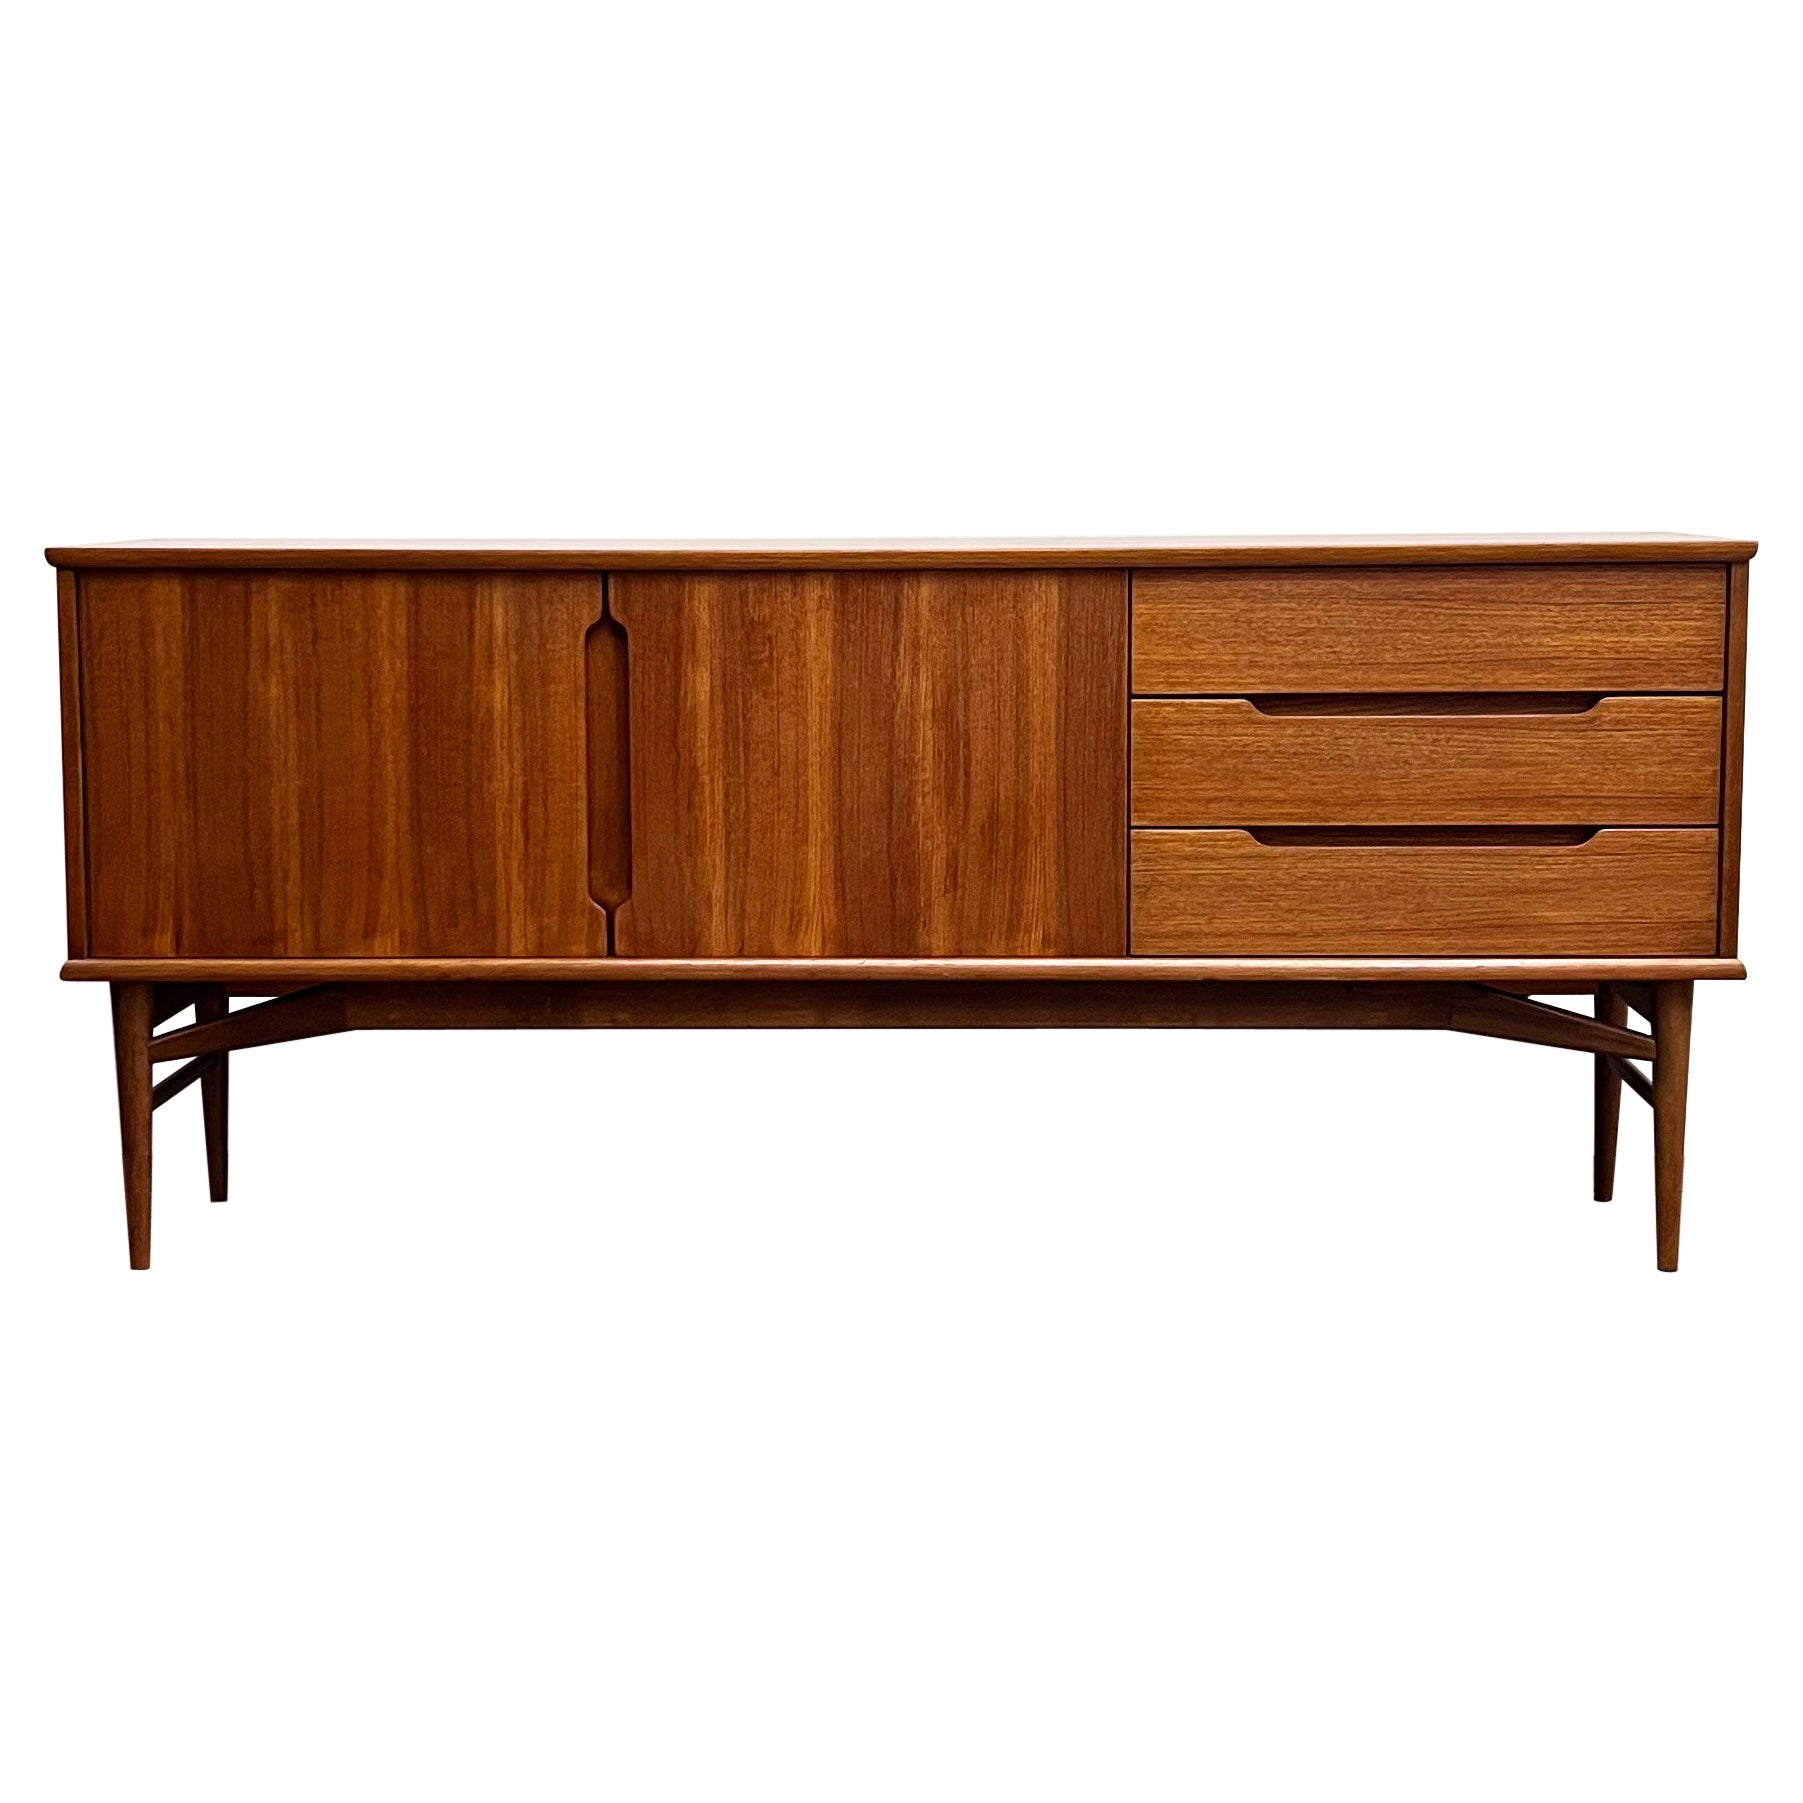 Small Mid-Century Modern Fredericia Sideboard in Teak, Germany, 1950s For Sale